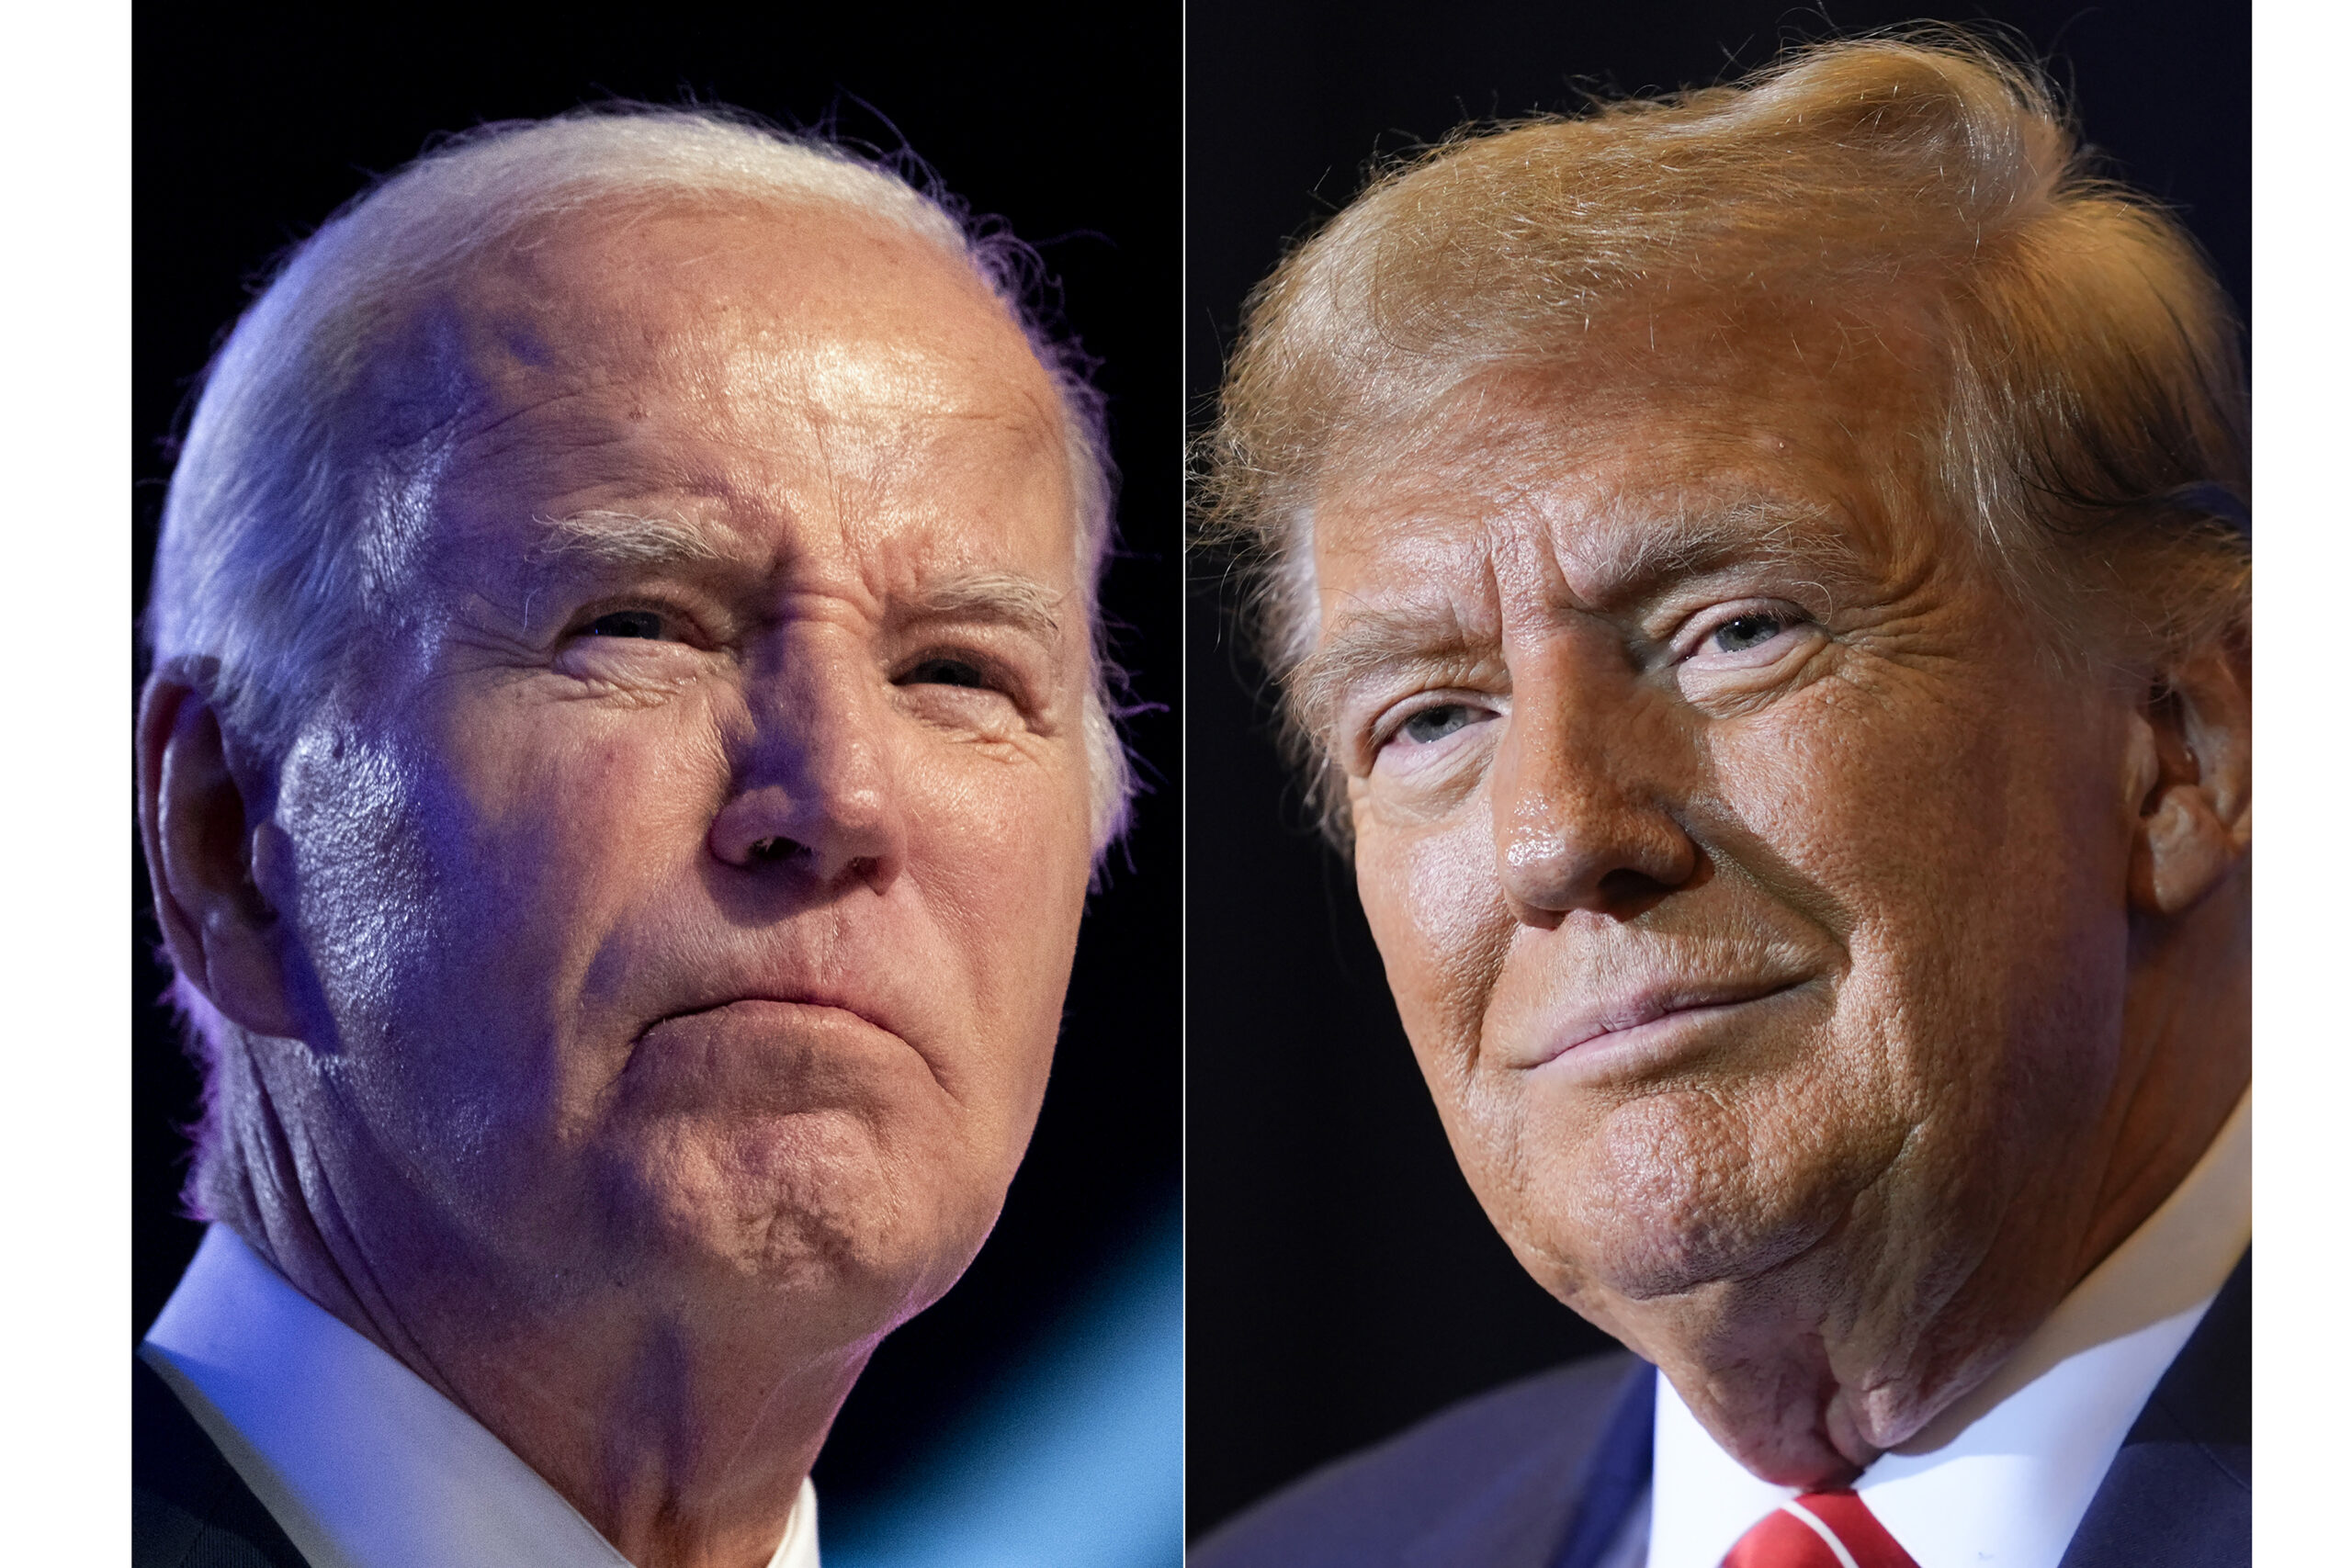 Both President Joe Biden and Republican Donald Trump have locked the nomination for their respectiv...